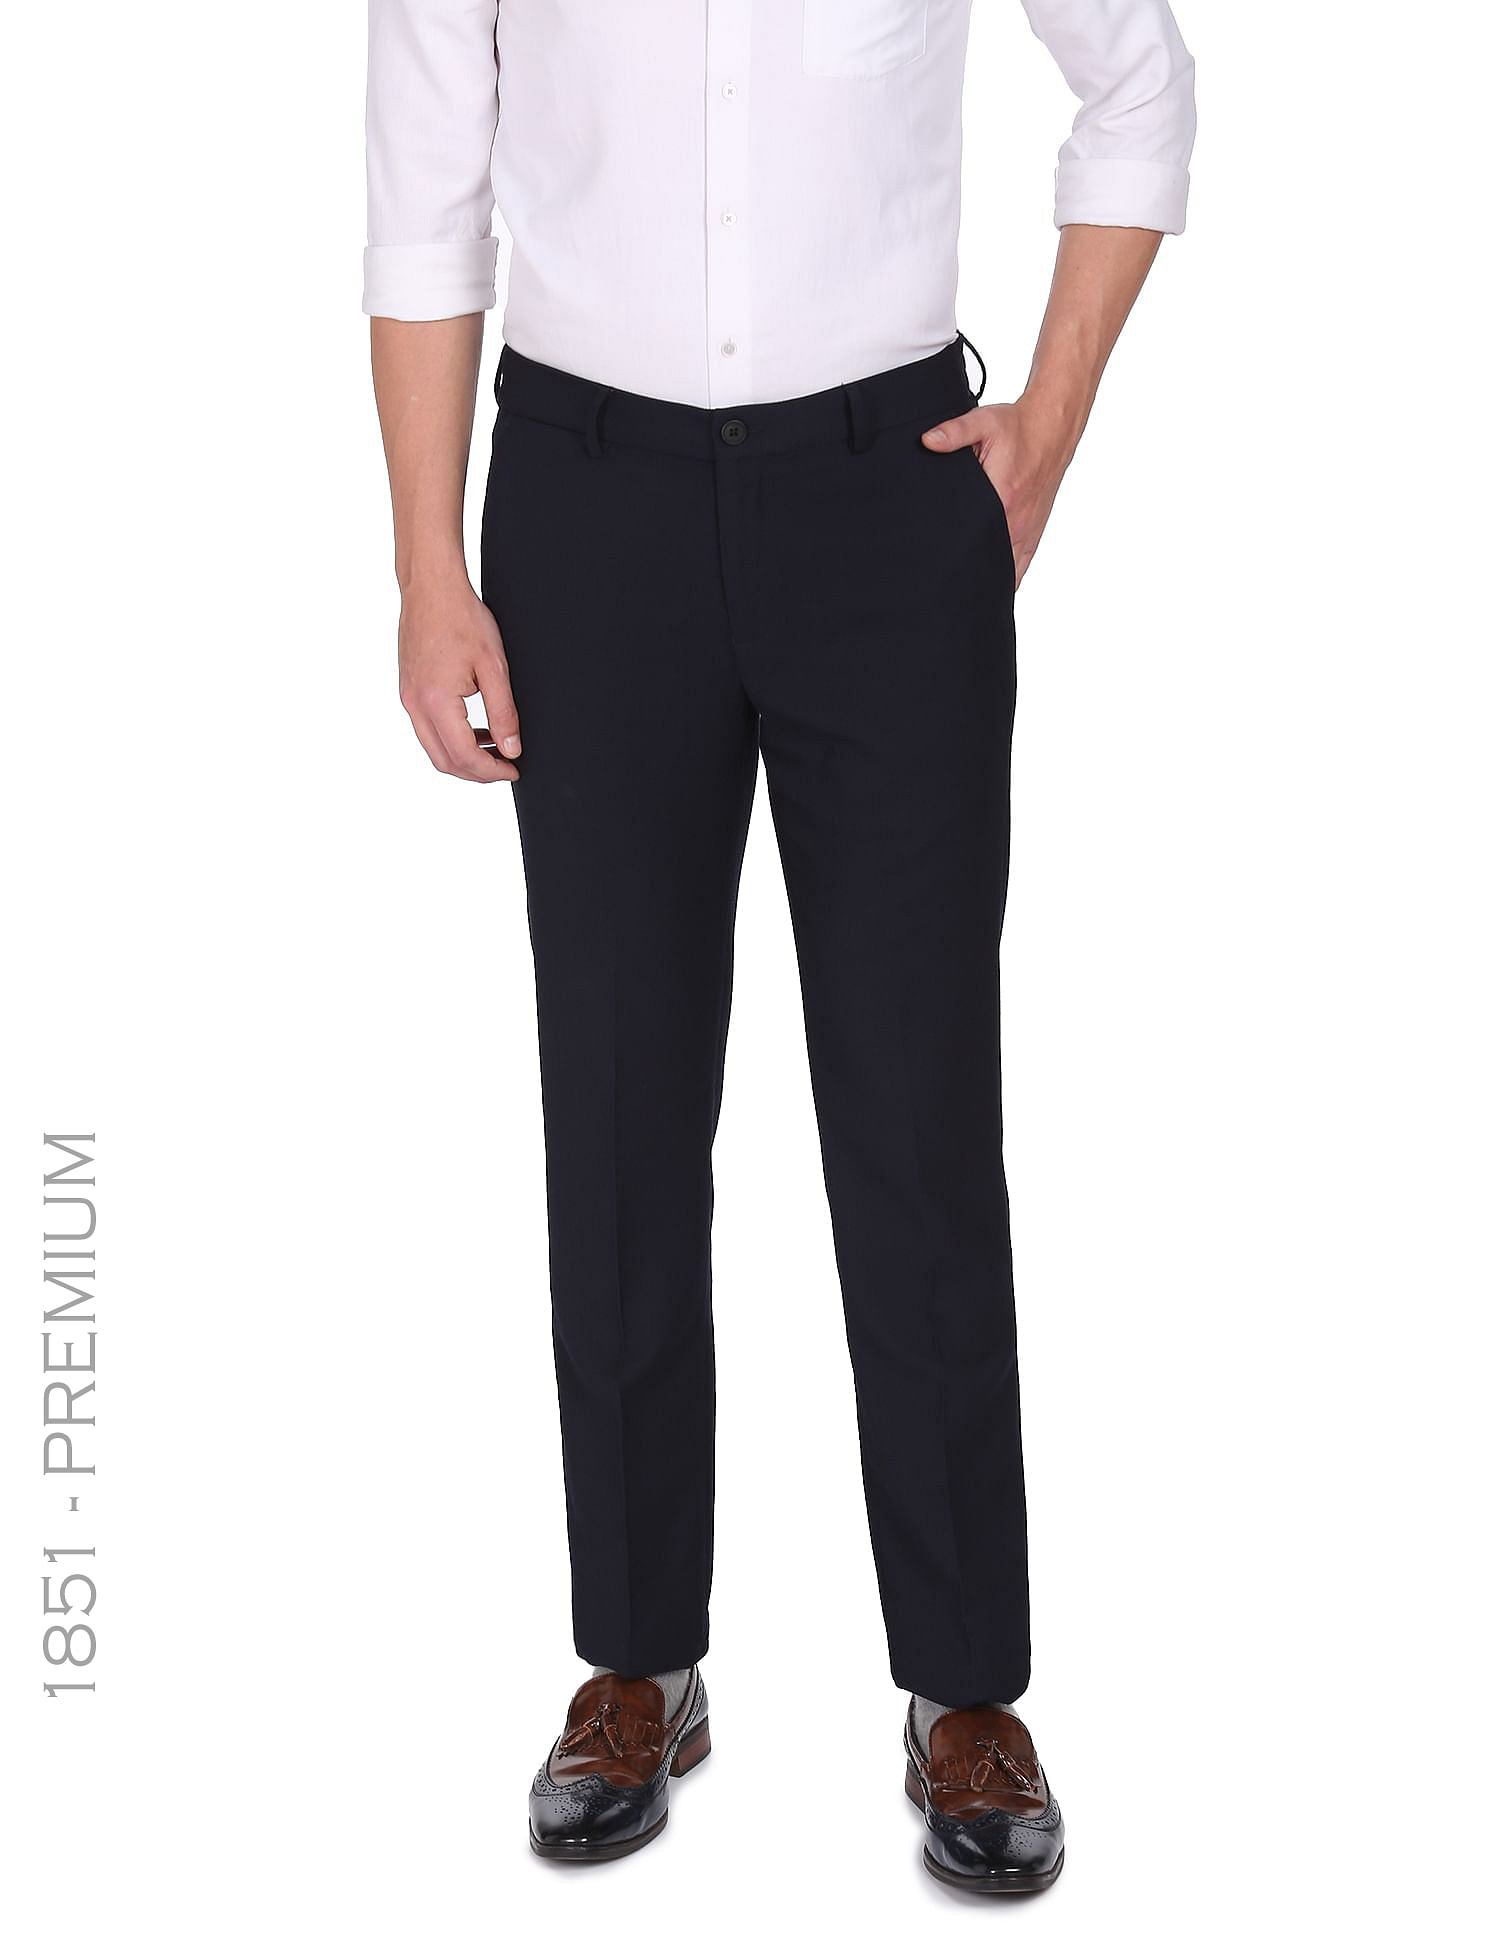 Buy Premium Men's Trousers/Pant for Style and Comfort | Explore Amazon's  Best Selection Today! (34) Black at Amazon.in